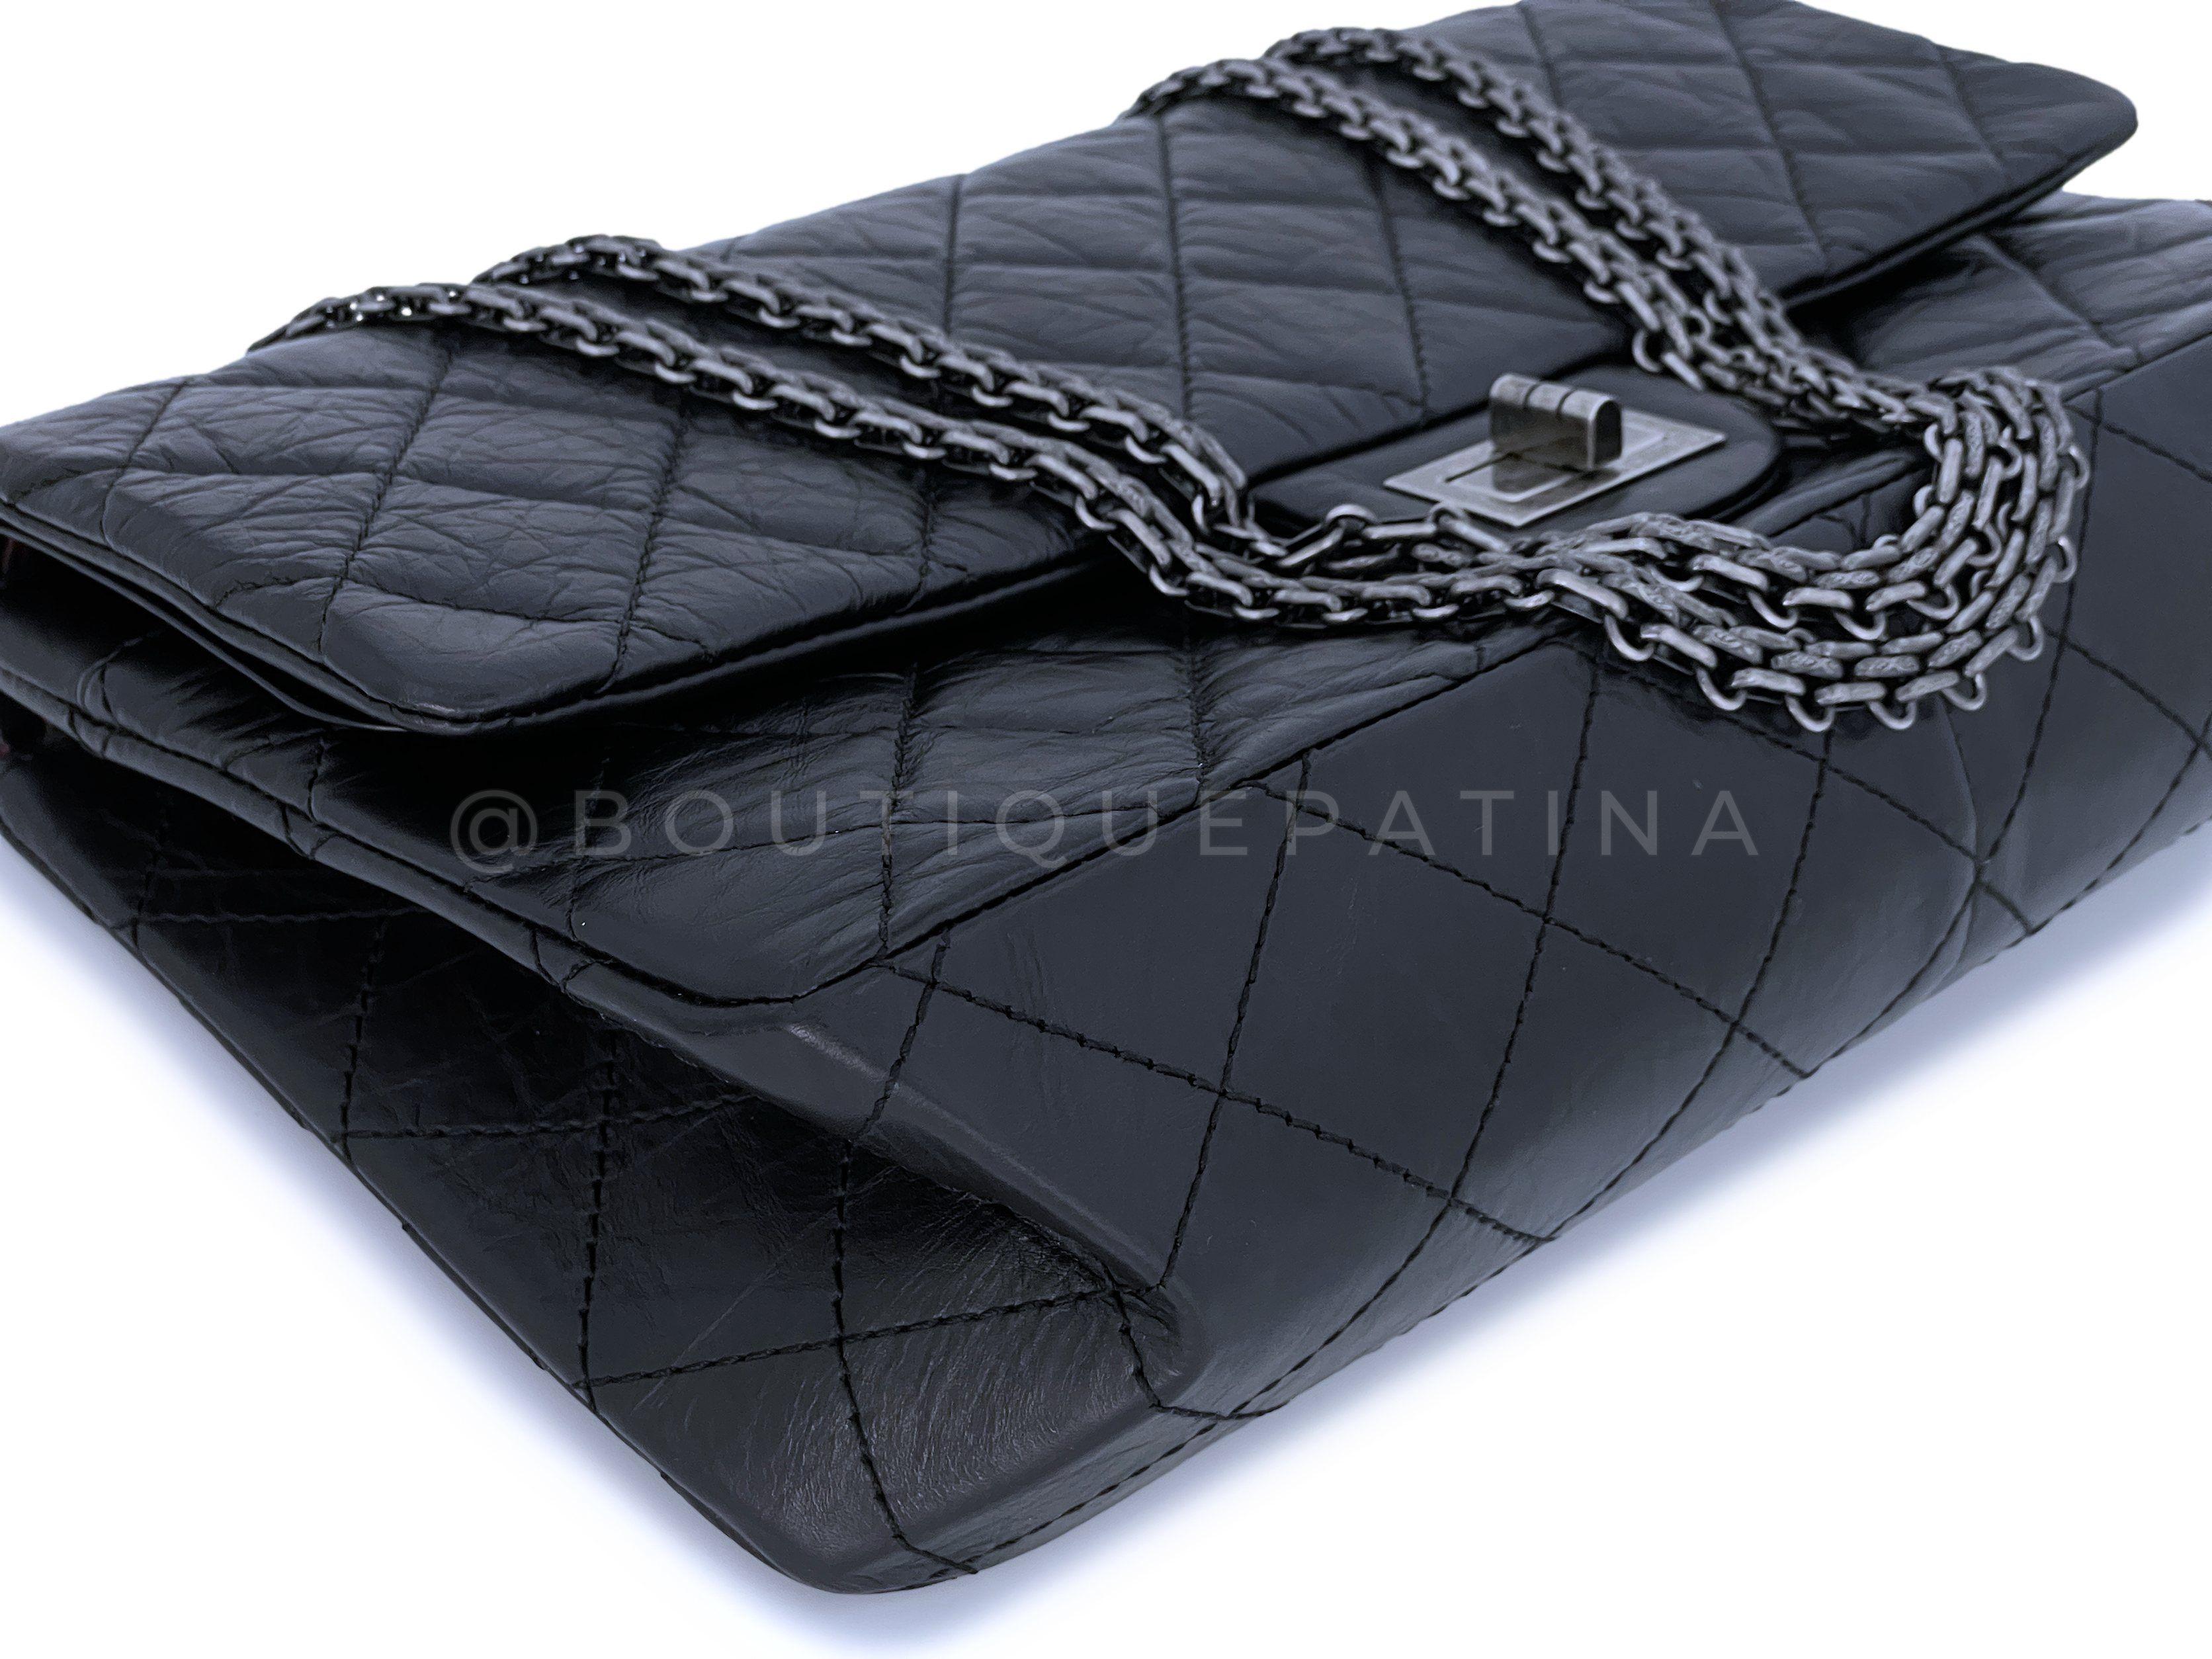 Pristine Chanel Black Aged Calfskin 2.55 Reissue 227 Double Flap Bag RHW 64730 For Sale 3